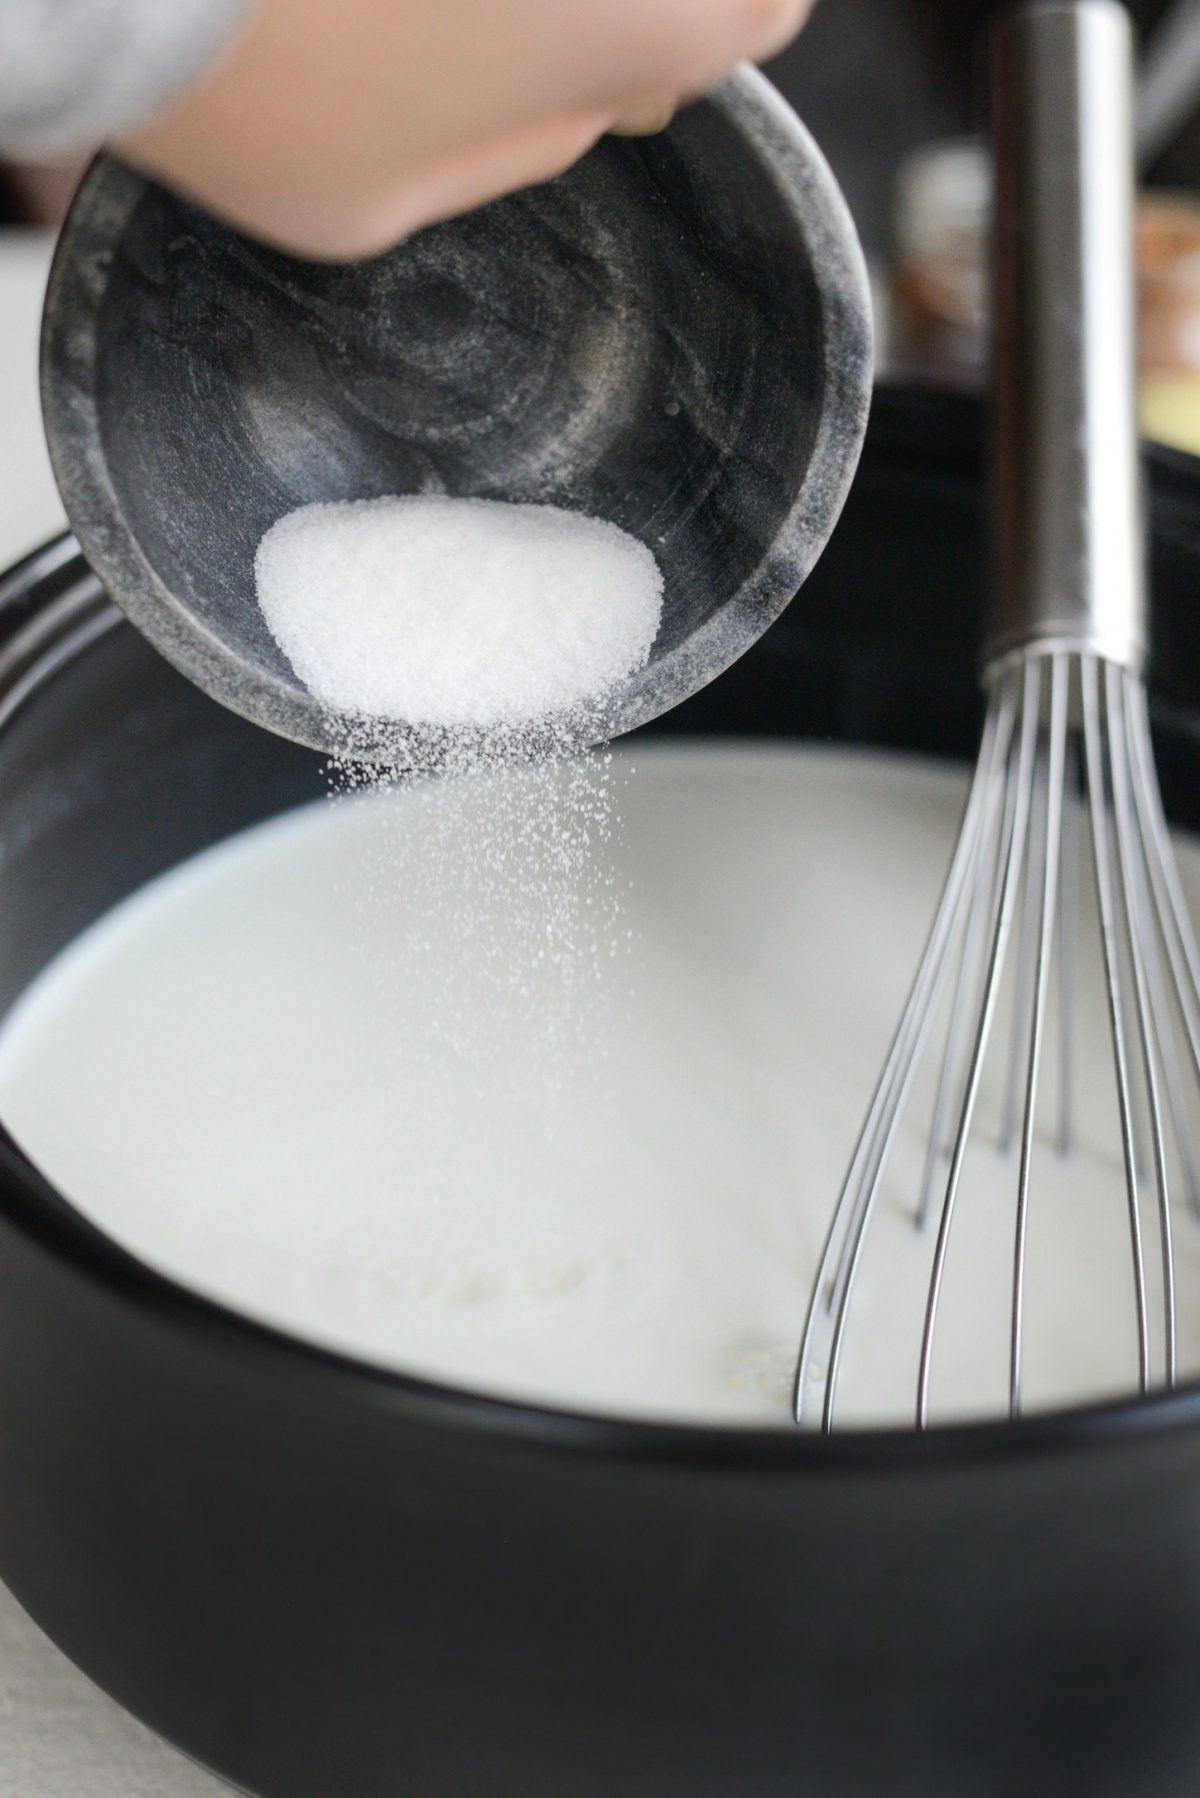 whisk in sugar to hot milk and cream.